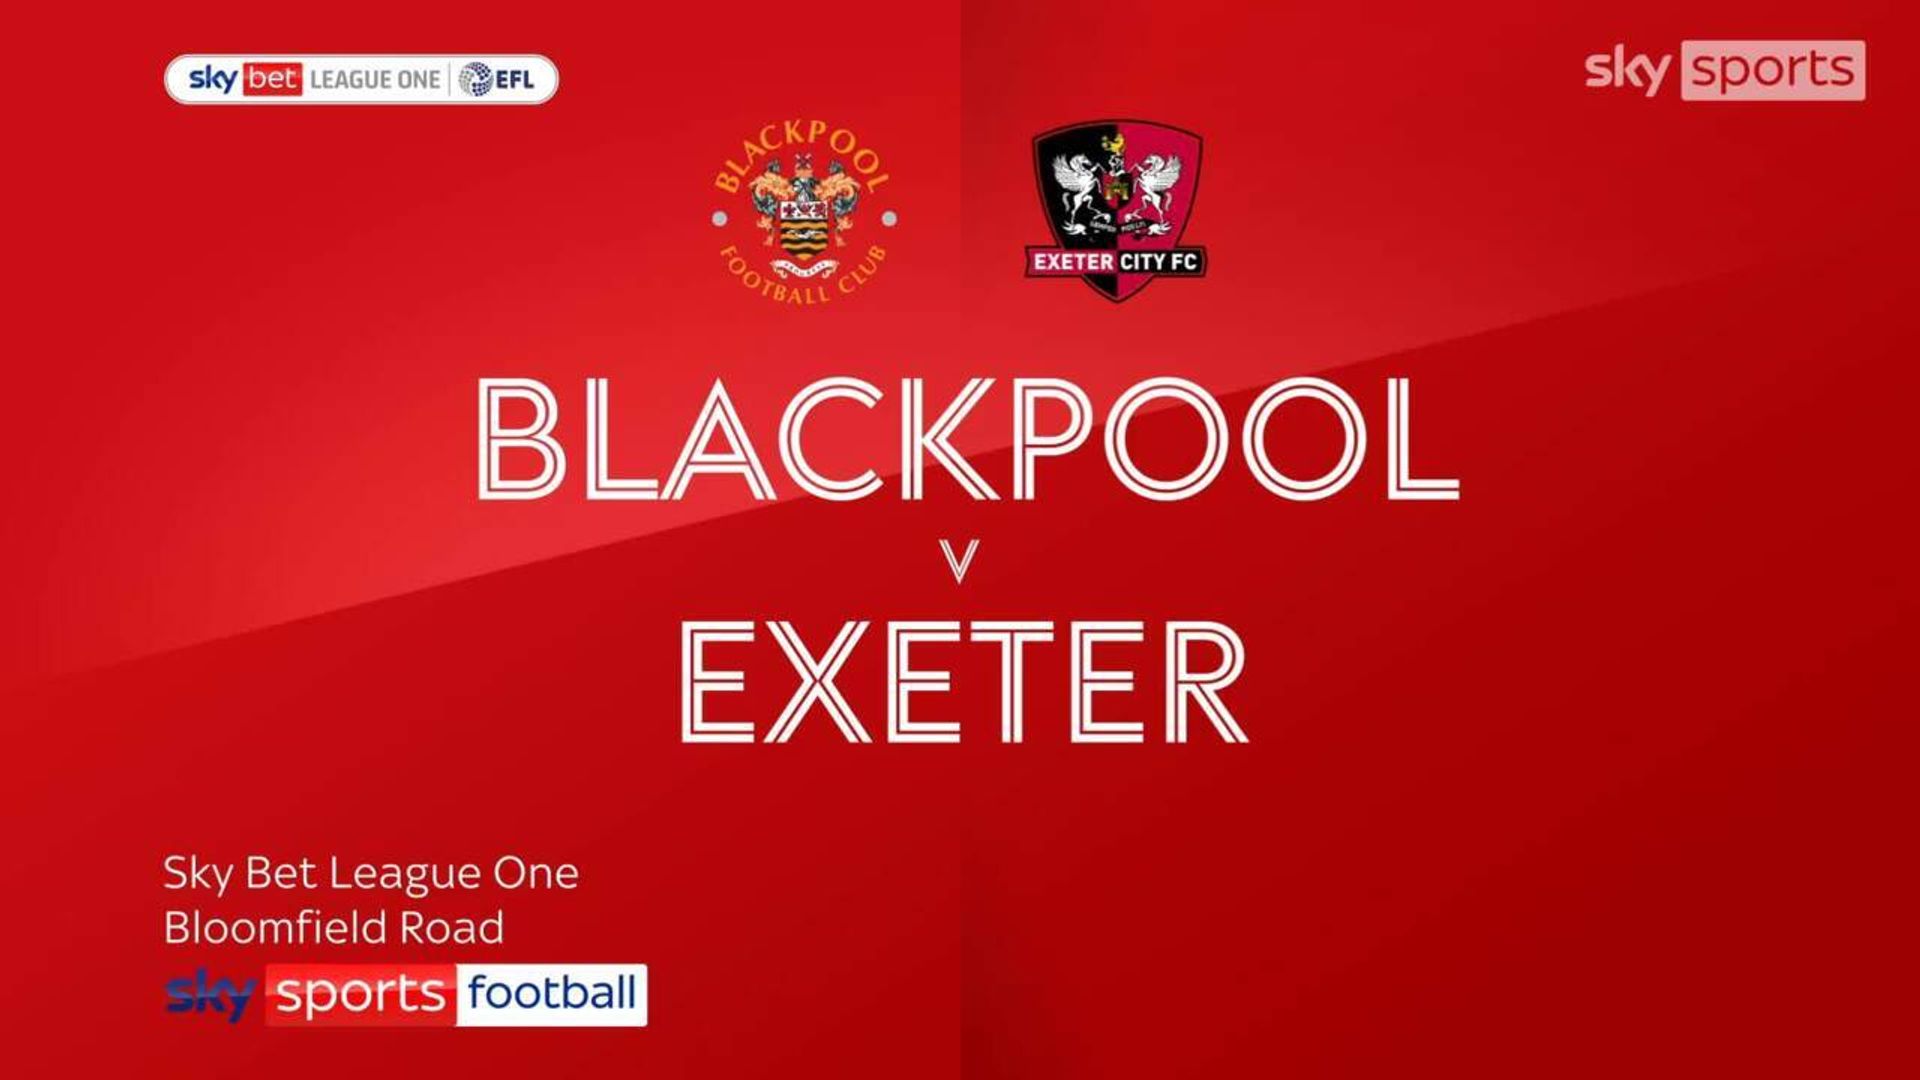 Blackpool 2-0 Exeter